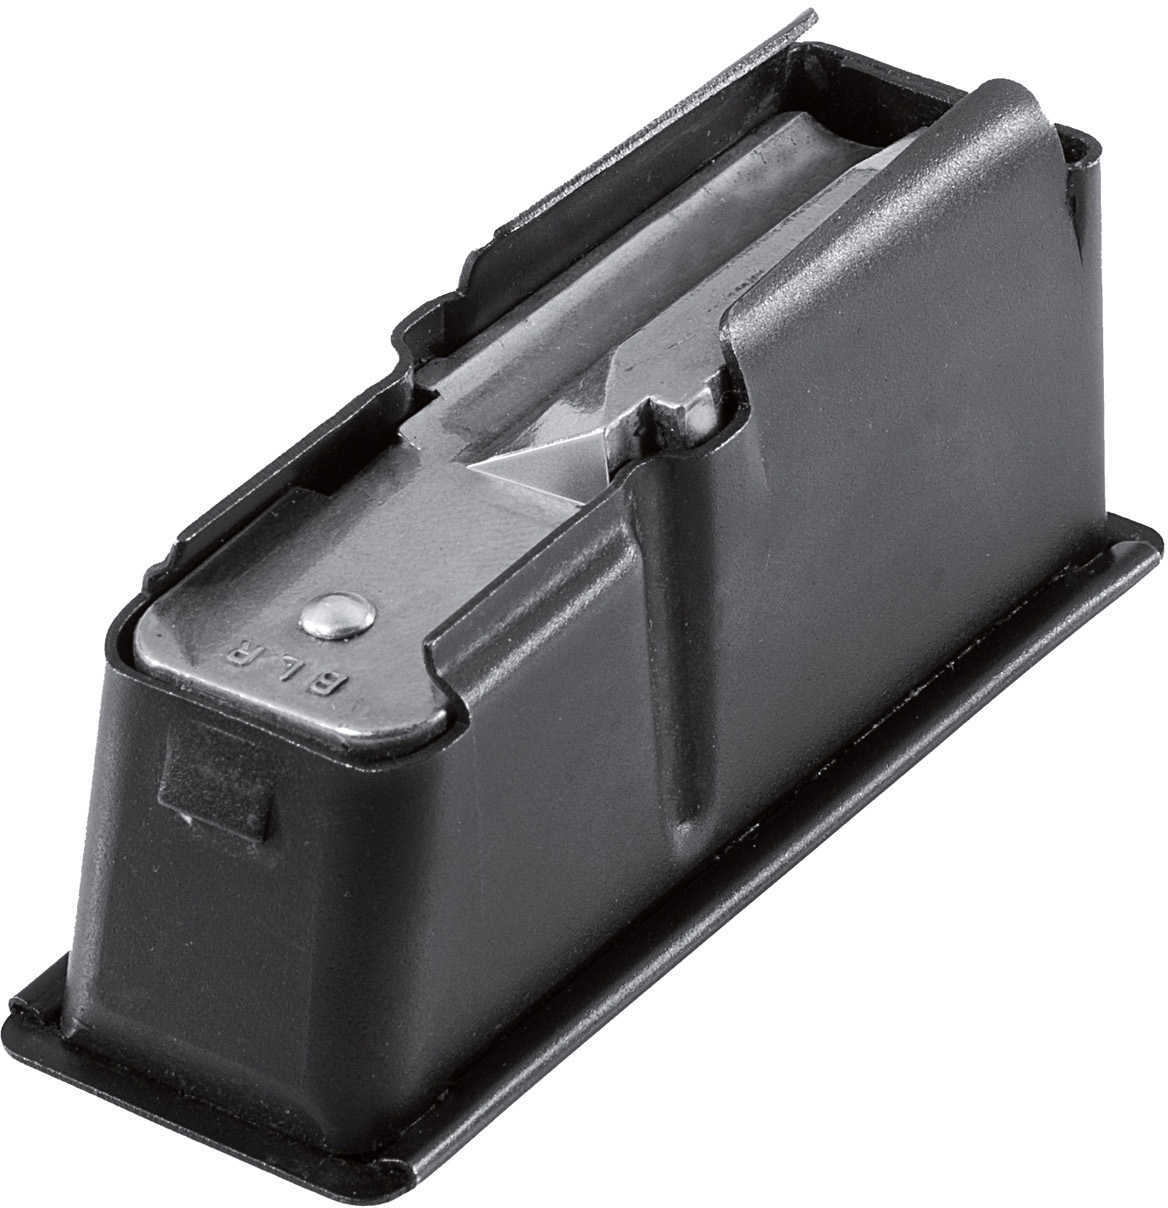 Browning 4 Round 358 Winchester BLR 81 Magazine With Black Finish Md: 112026042